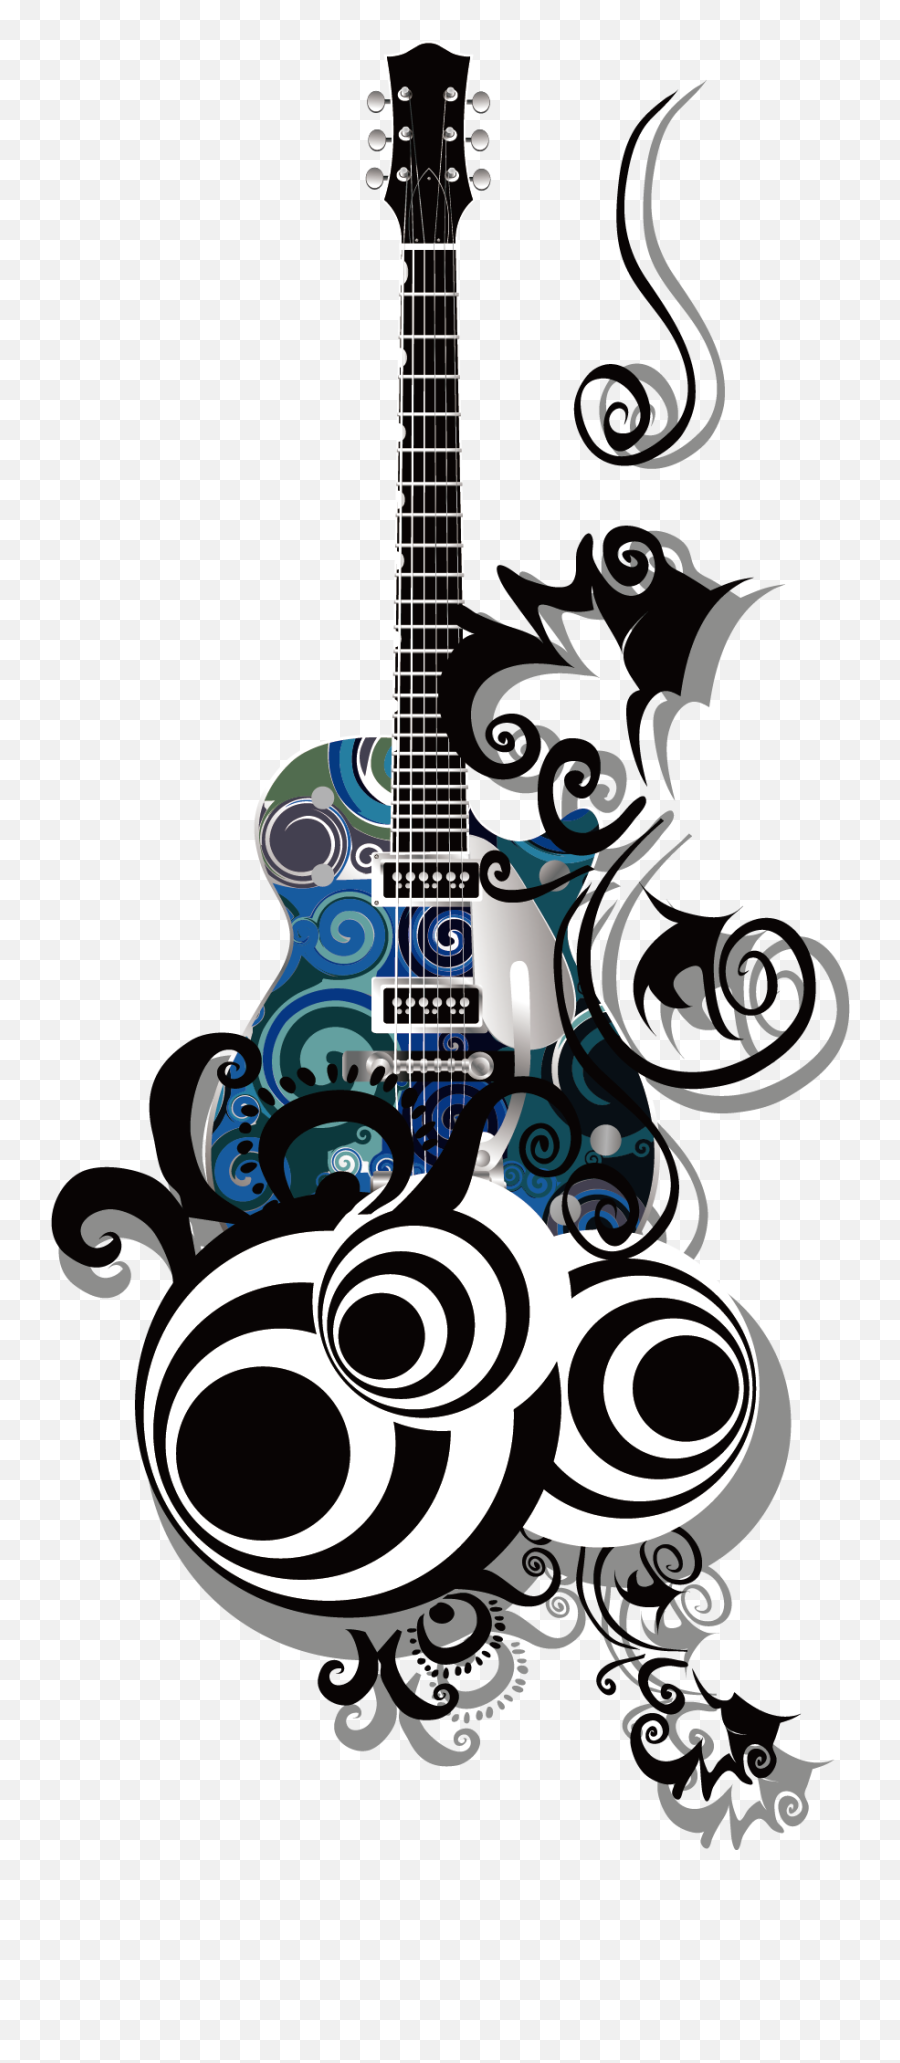 Download And Decorative Wall Sticker Material India Guitar Emoji,Guitar Clipart Png